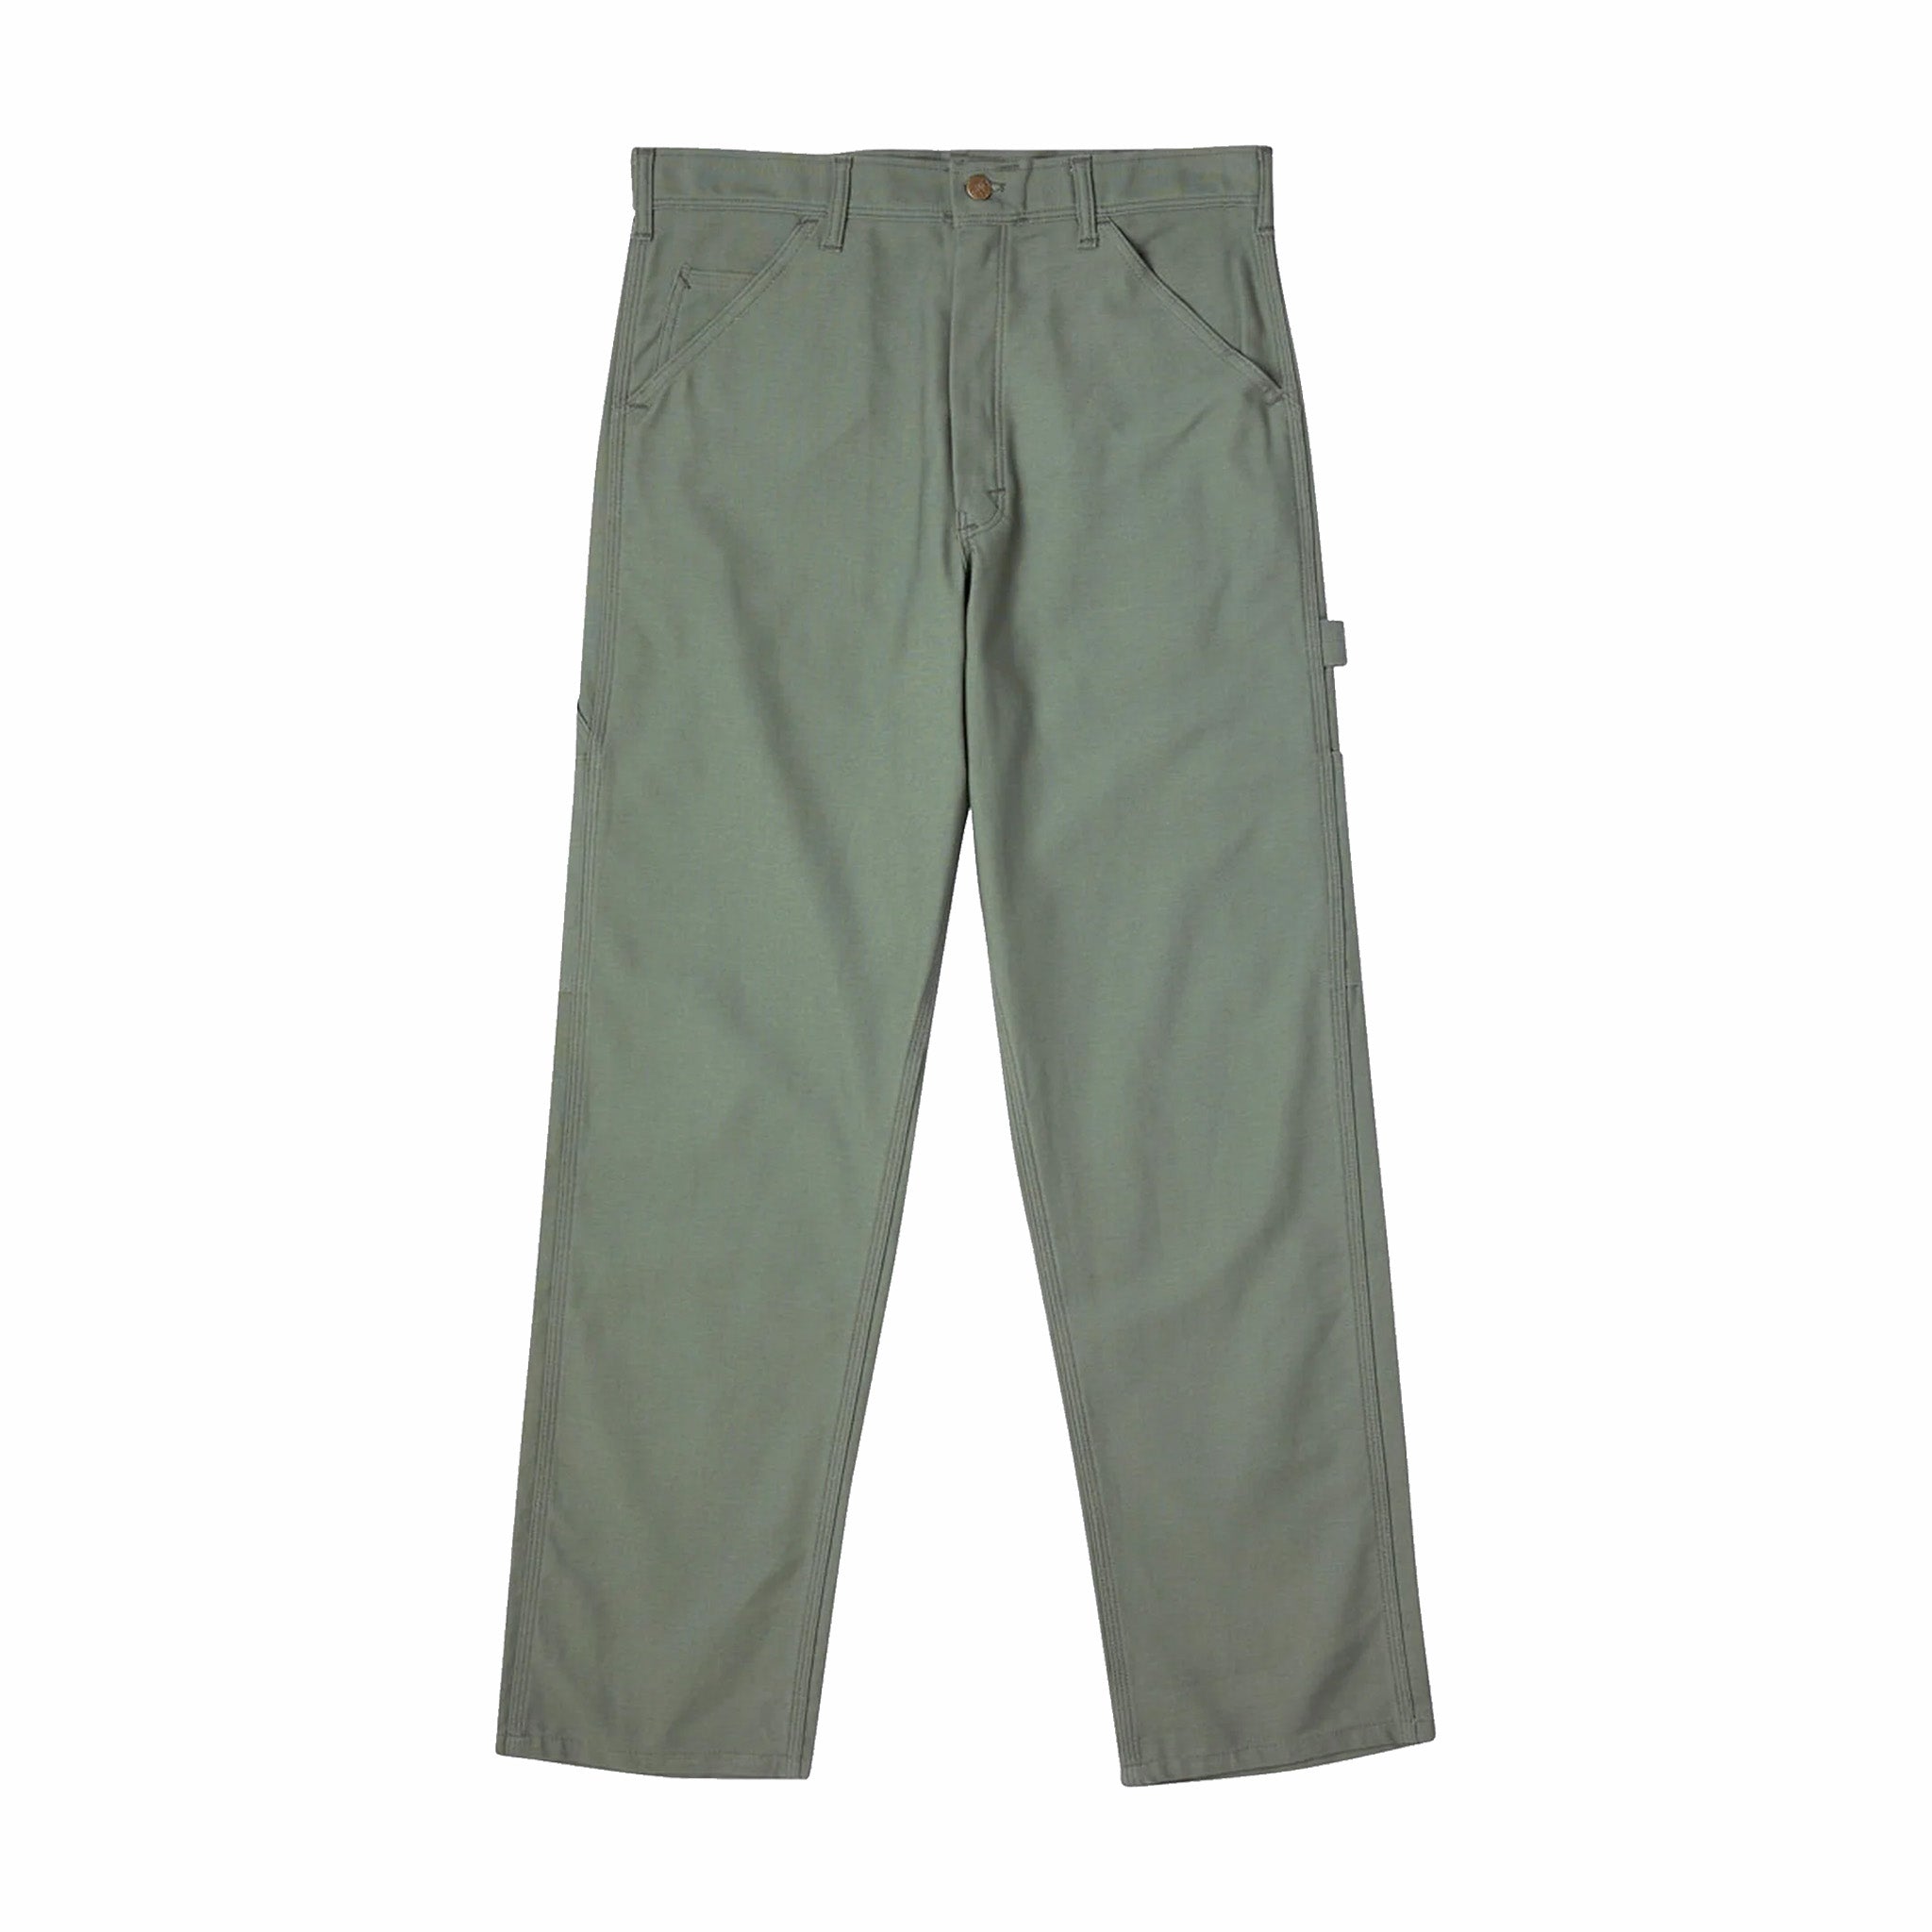 Stan Ray Original Painter Pant (Olive Sateen) - August Shop